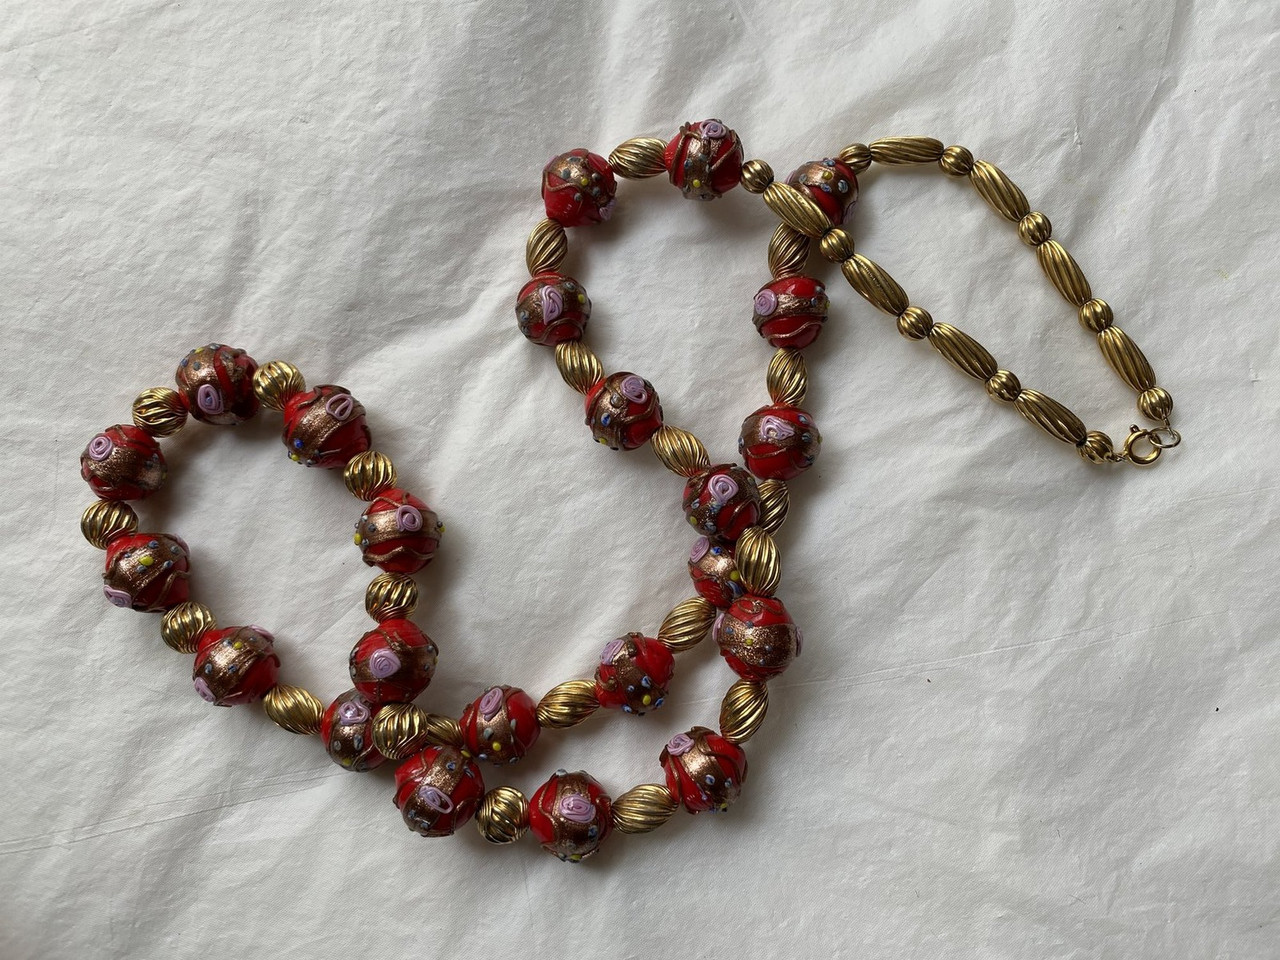 Buy Millefiori Murano Glass Necklace, Vintage Oval Venetian Beads From the  1970's, Restrung With Black & Red Seed Beads, Barrel Clasp, 19 Inches  Online in India - Etsy